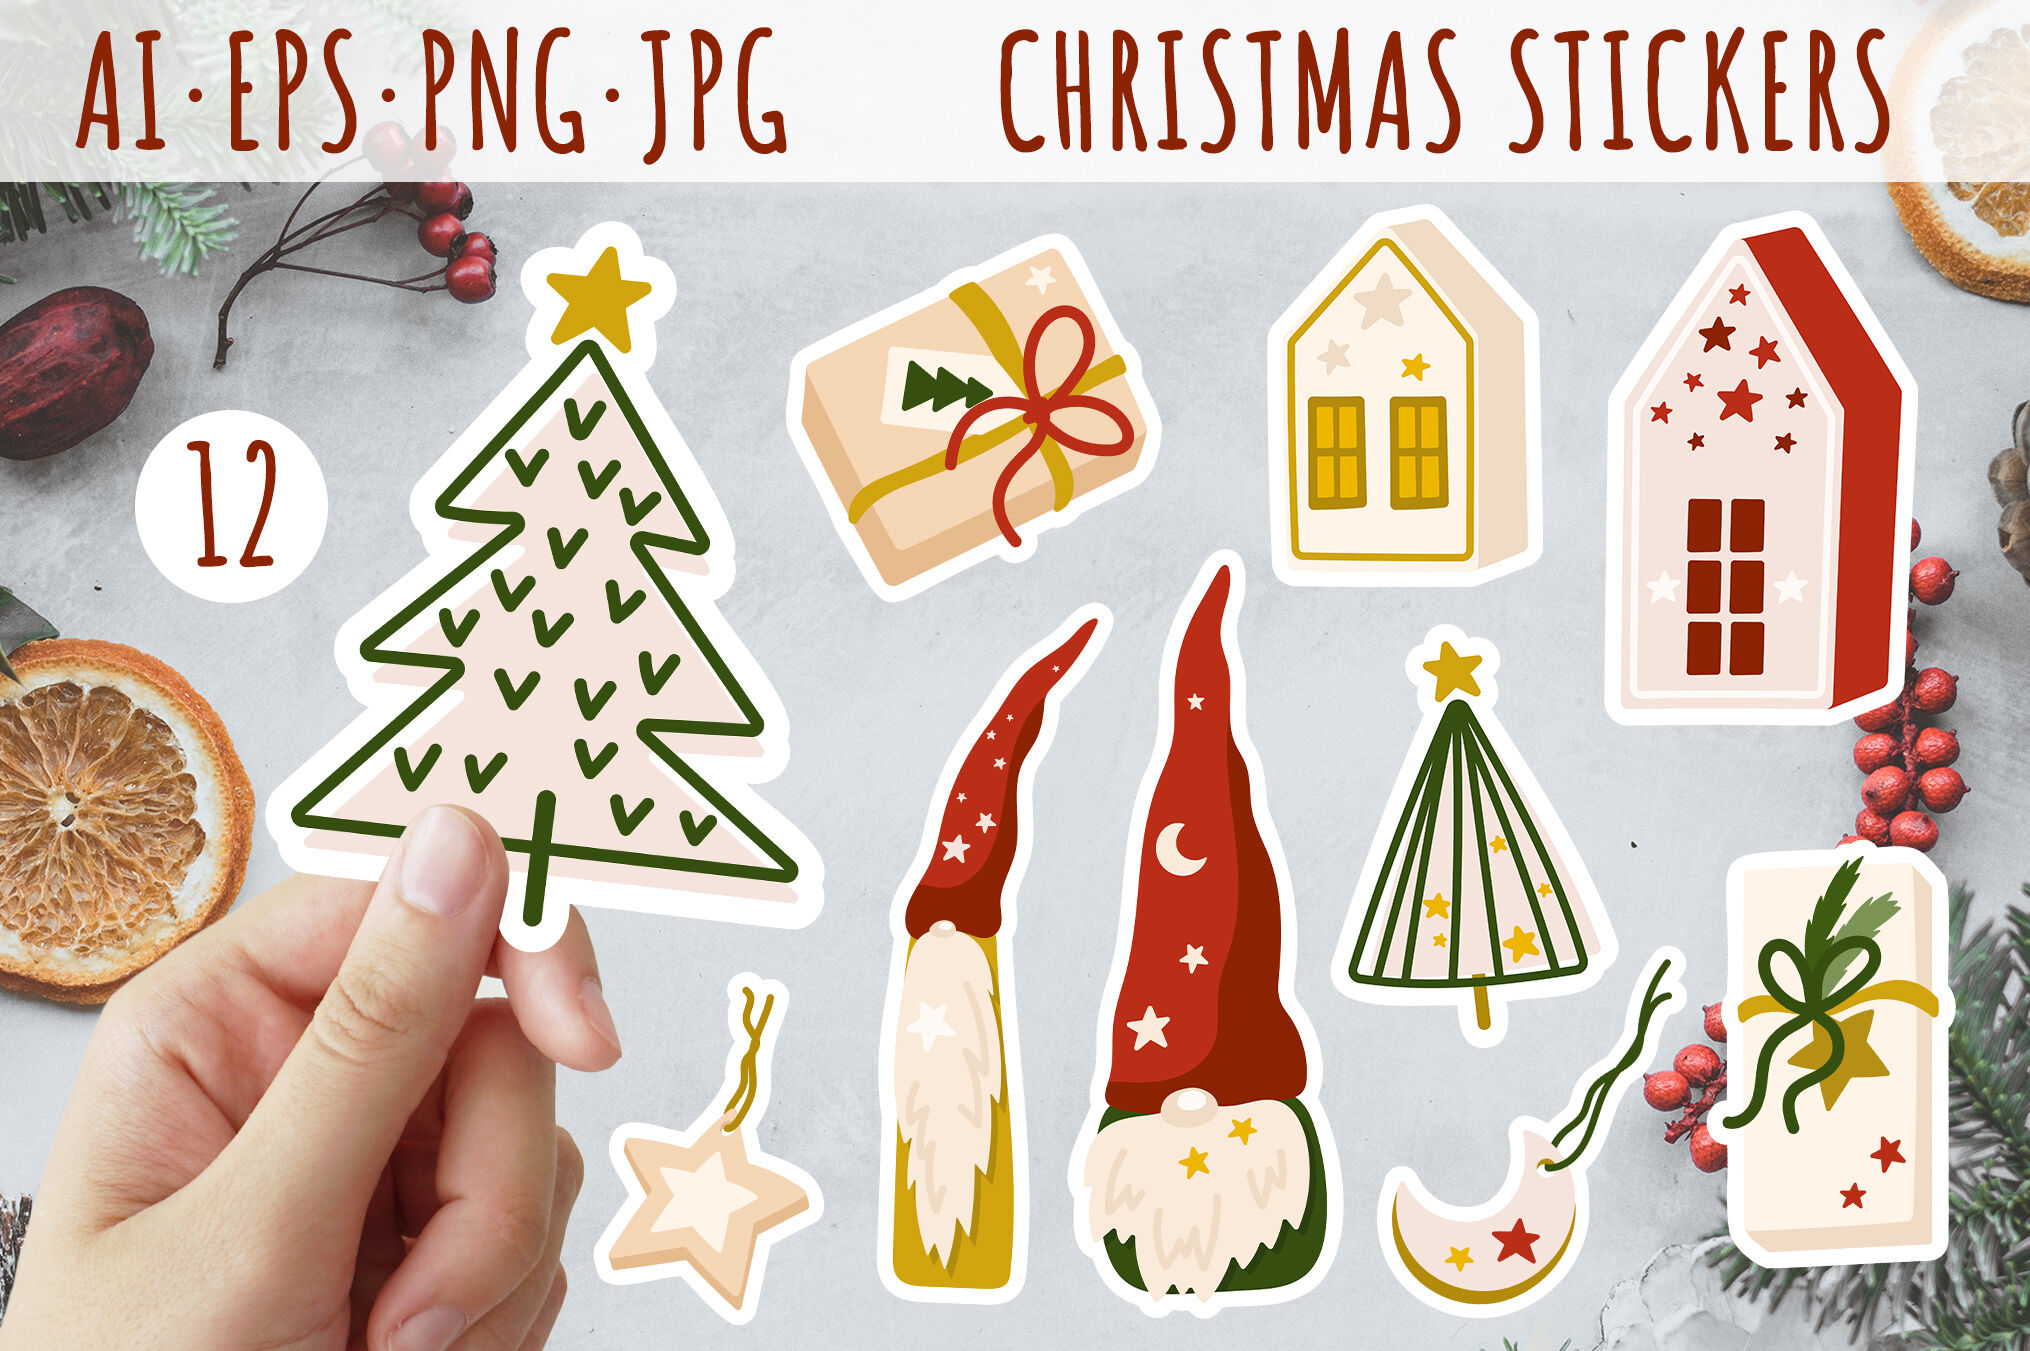 Christmas stickers, Gnome stickers, Christmas tree stickers By ArtFM